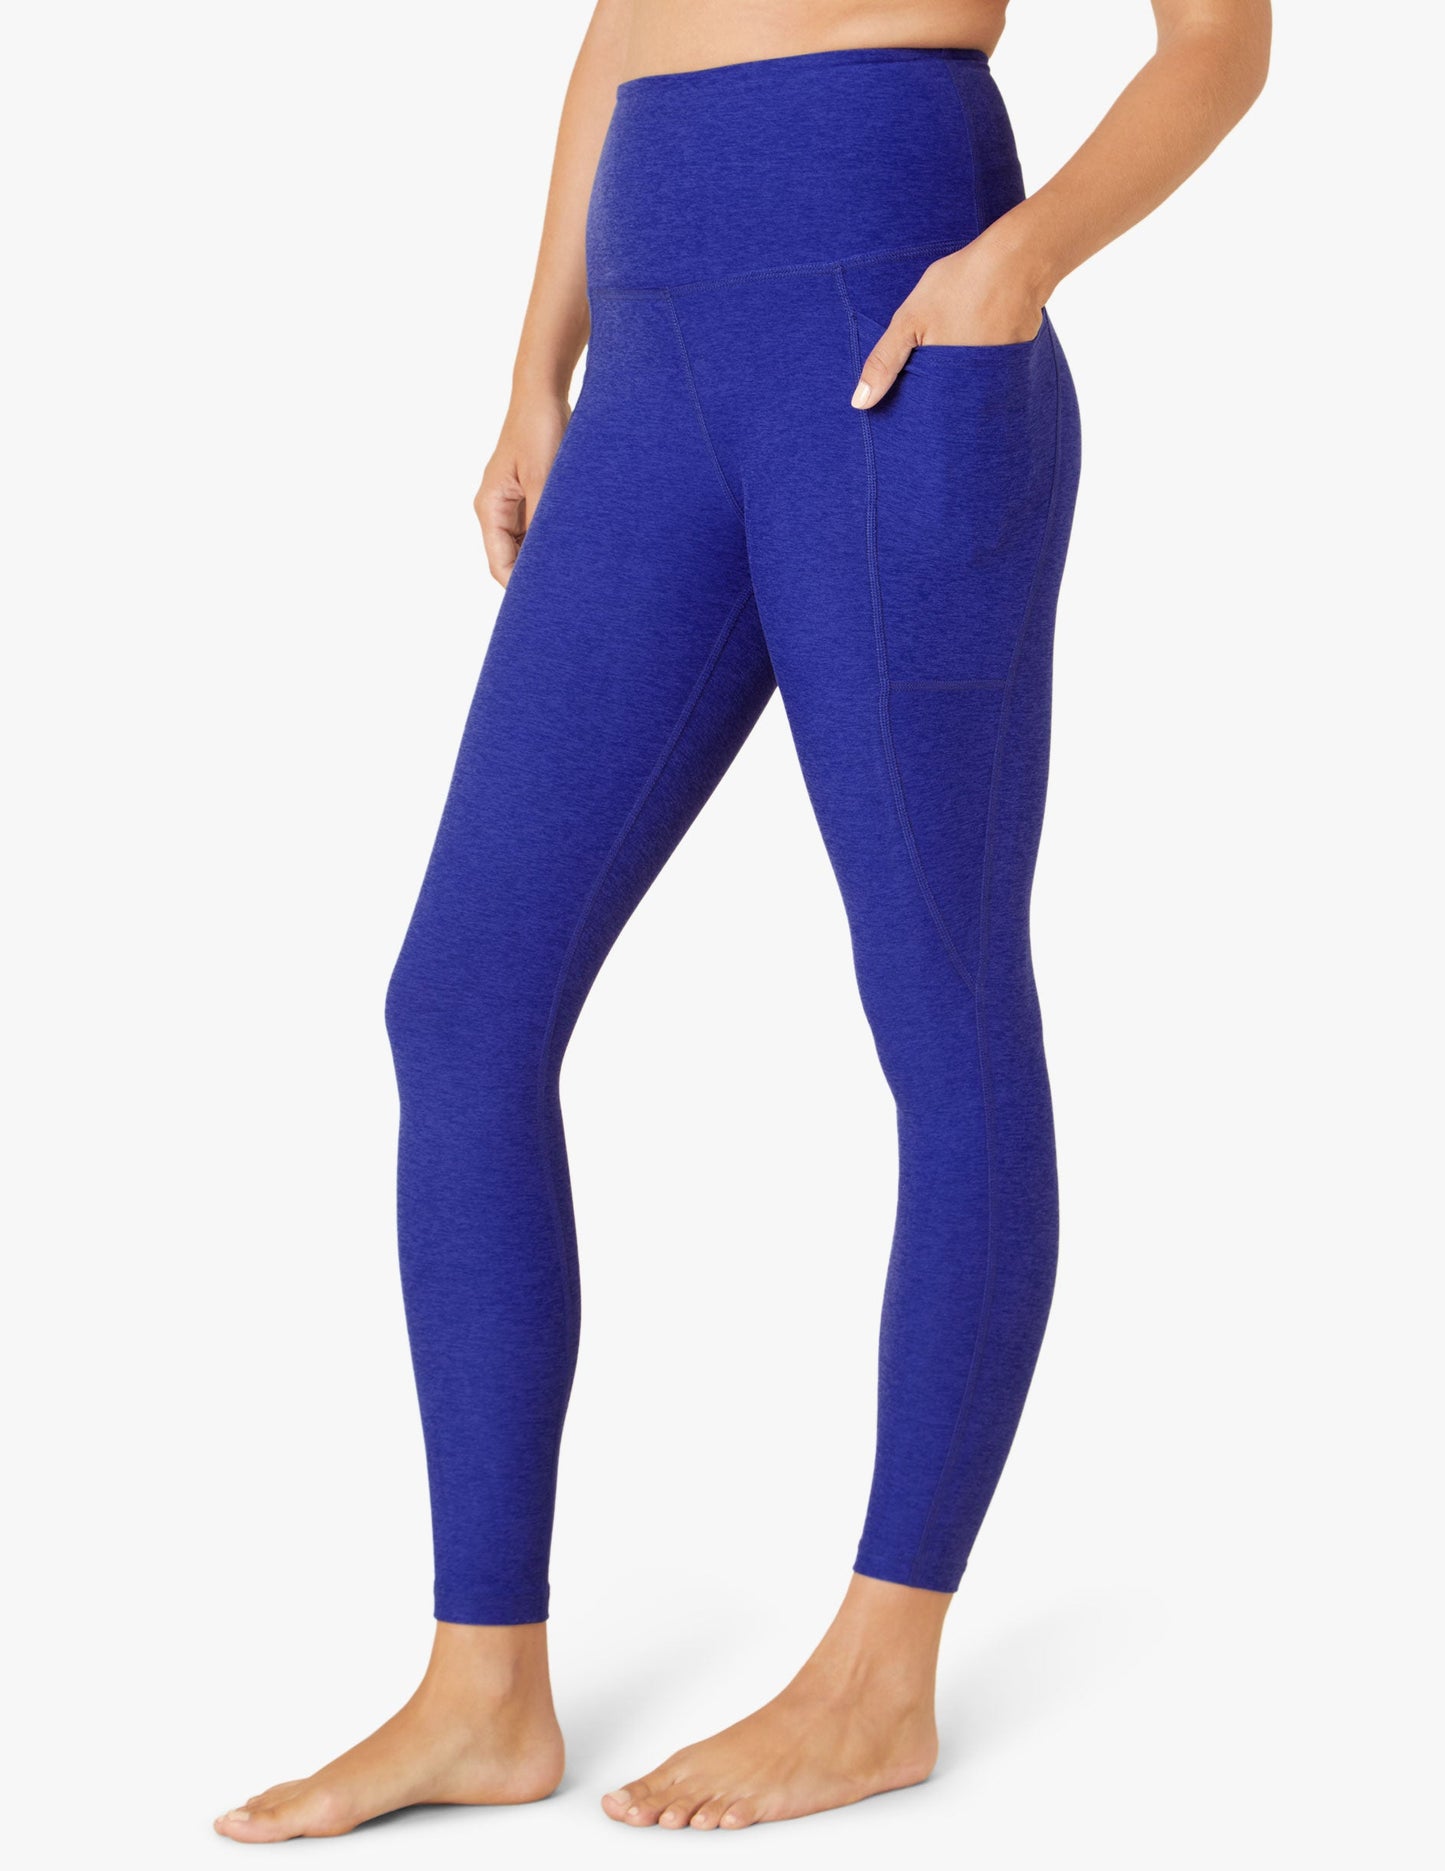 BEYOND YOGA OUT OF POCKET MIDI HIGH WAISTED LEGGING SAPPHIRE BLUE HEATHER